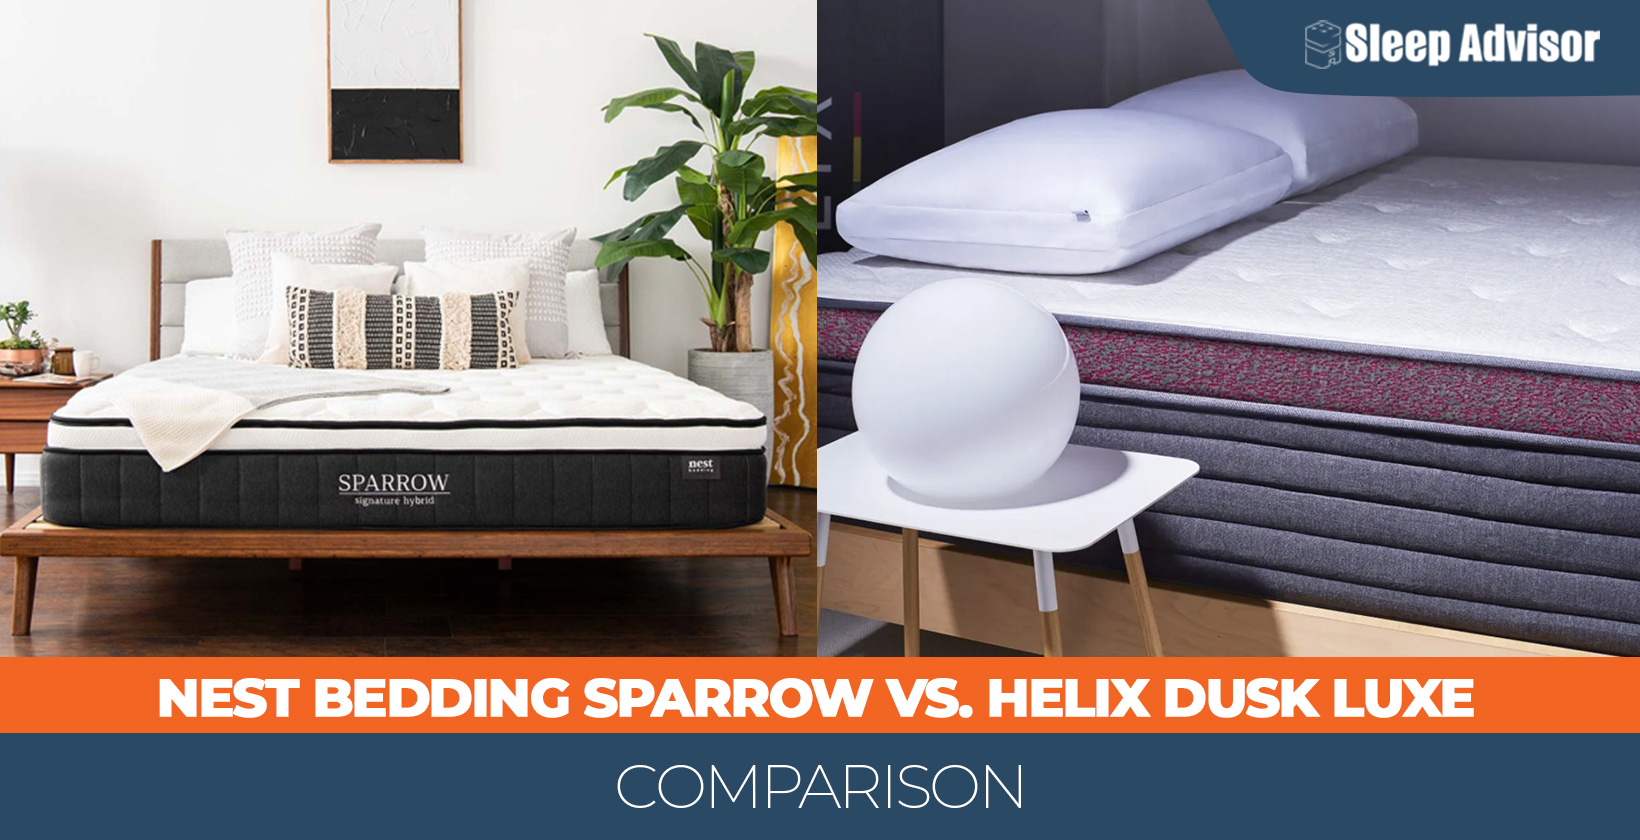 Our in depth comparison of Nest Bedding Sparrow vs. Helix Dusk Luxe